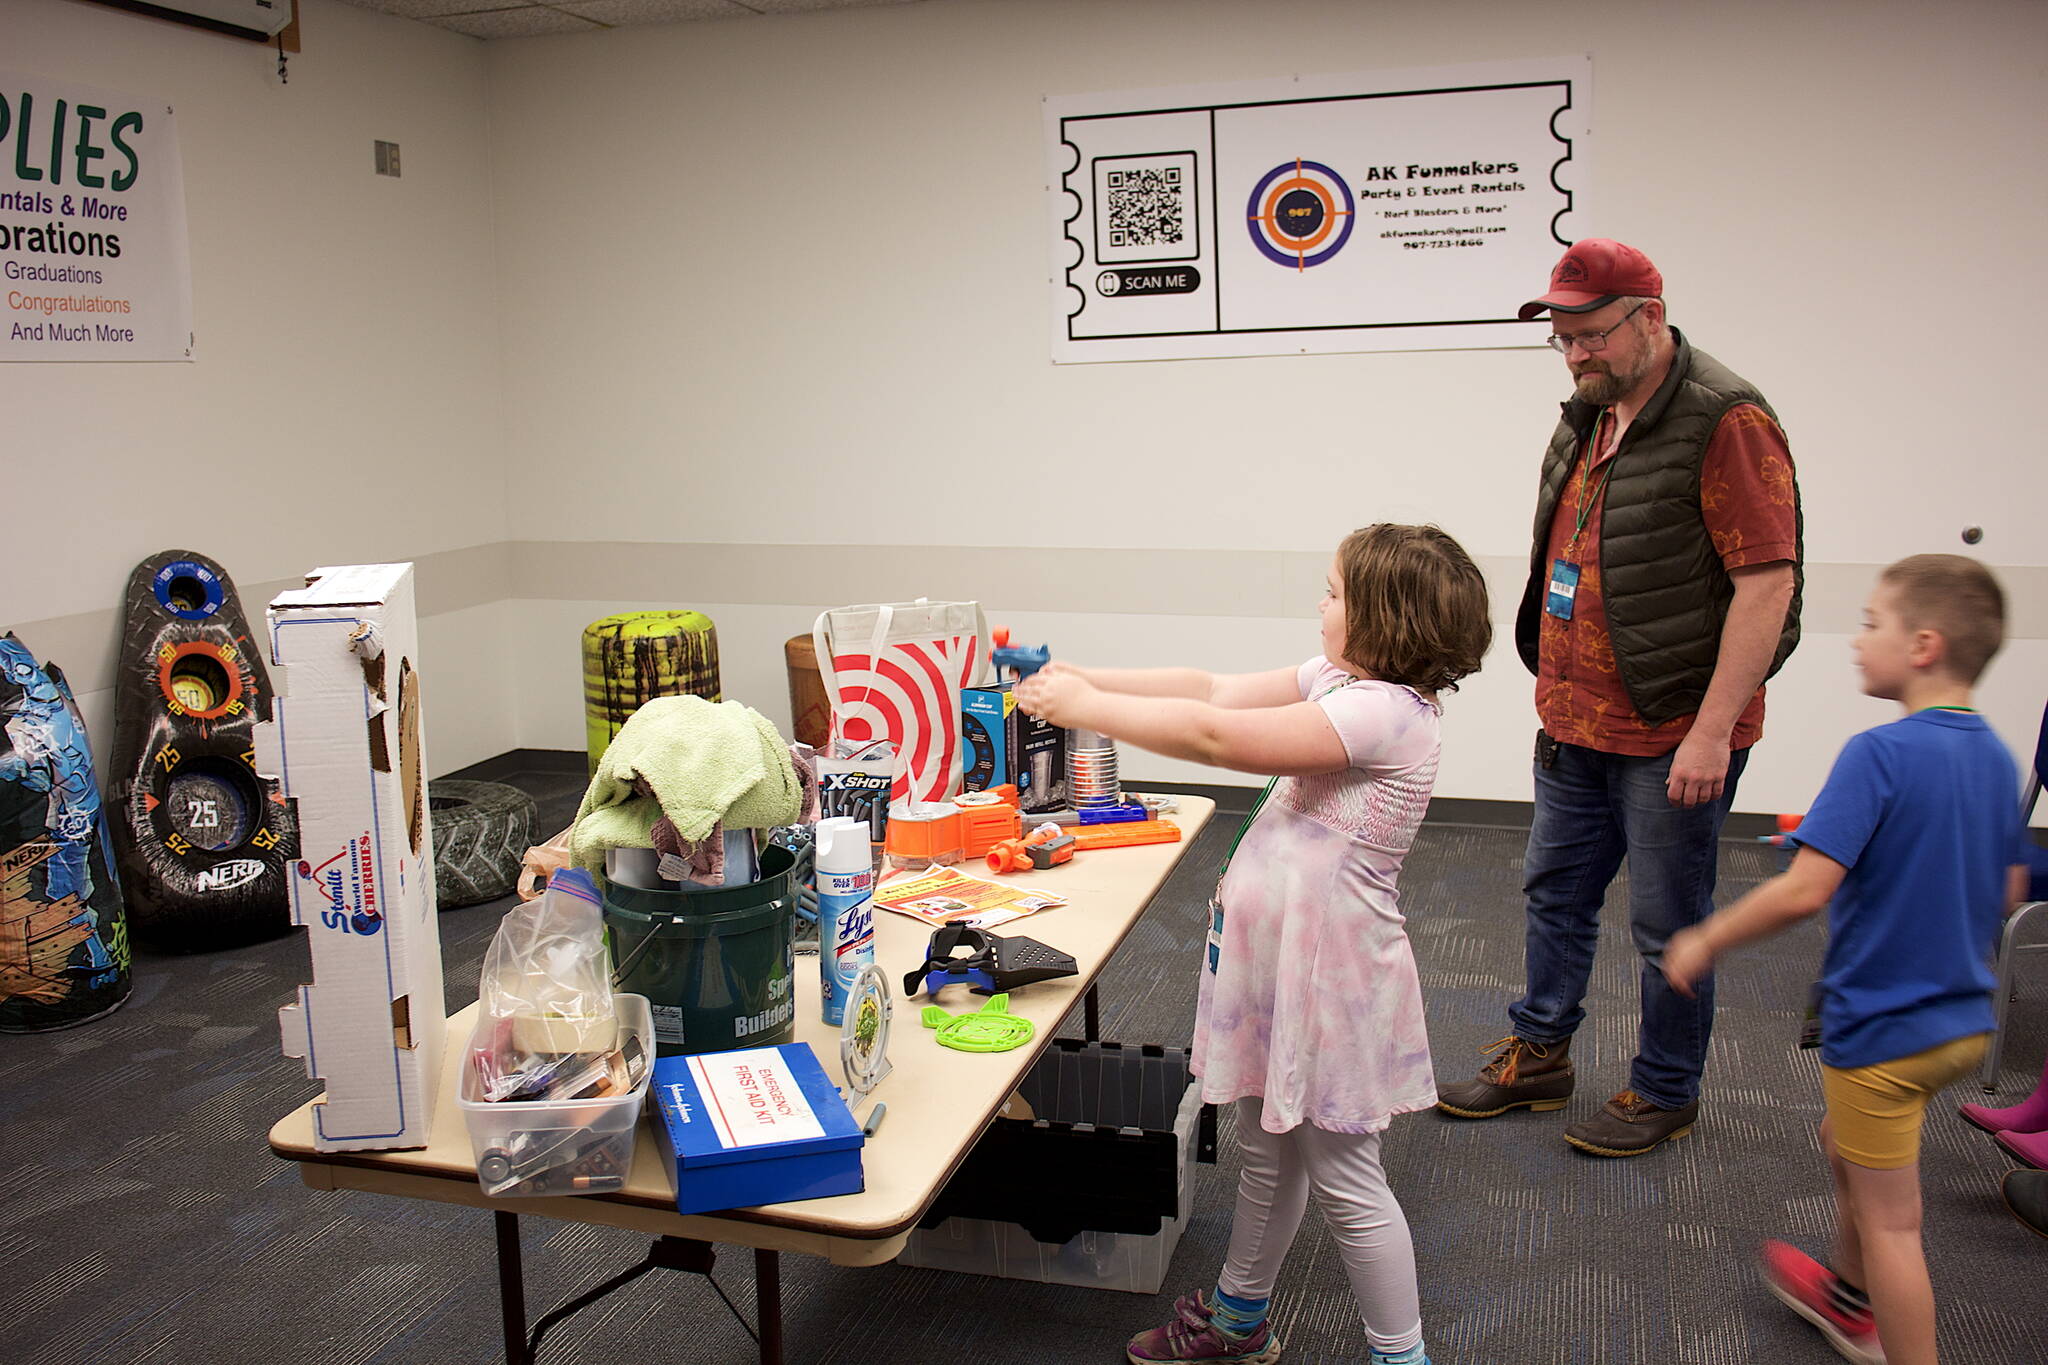 Lilah Sears, 10, aims a Nerf gun at a target while her father, Karl, and brother, Benji, 7, watch during the annual Platypus-Con Board and Card Game Extravaganza at Centennial Hall on Saturday. (Mark Sabbatini / Juneau Empire)